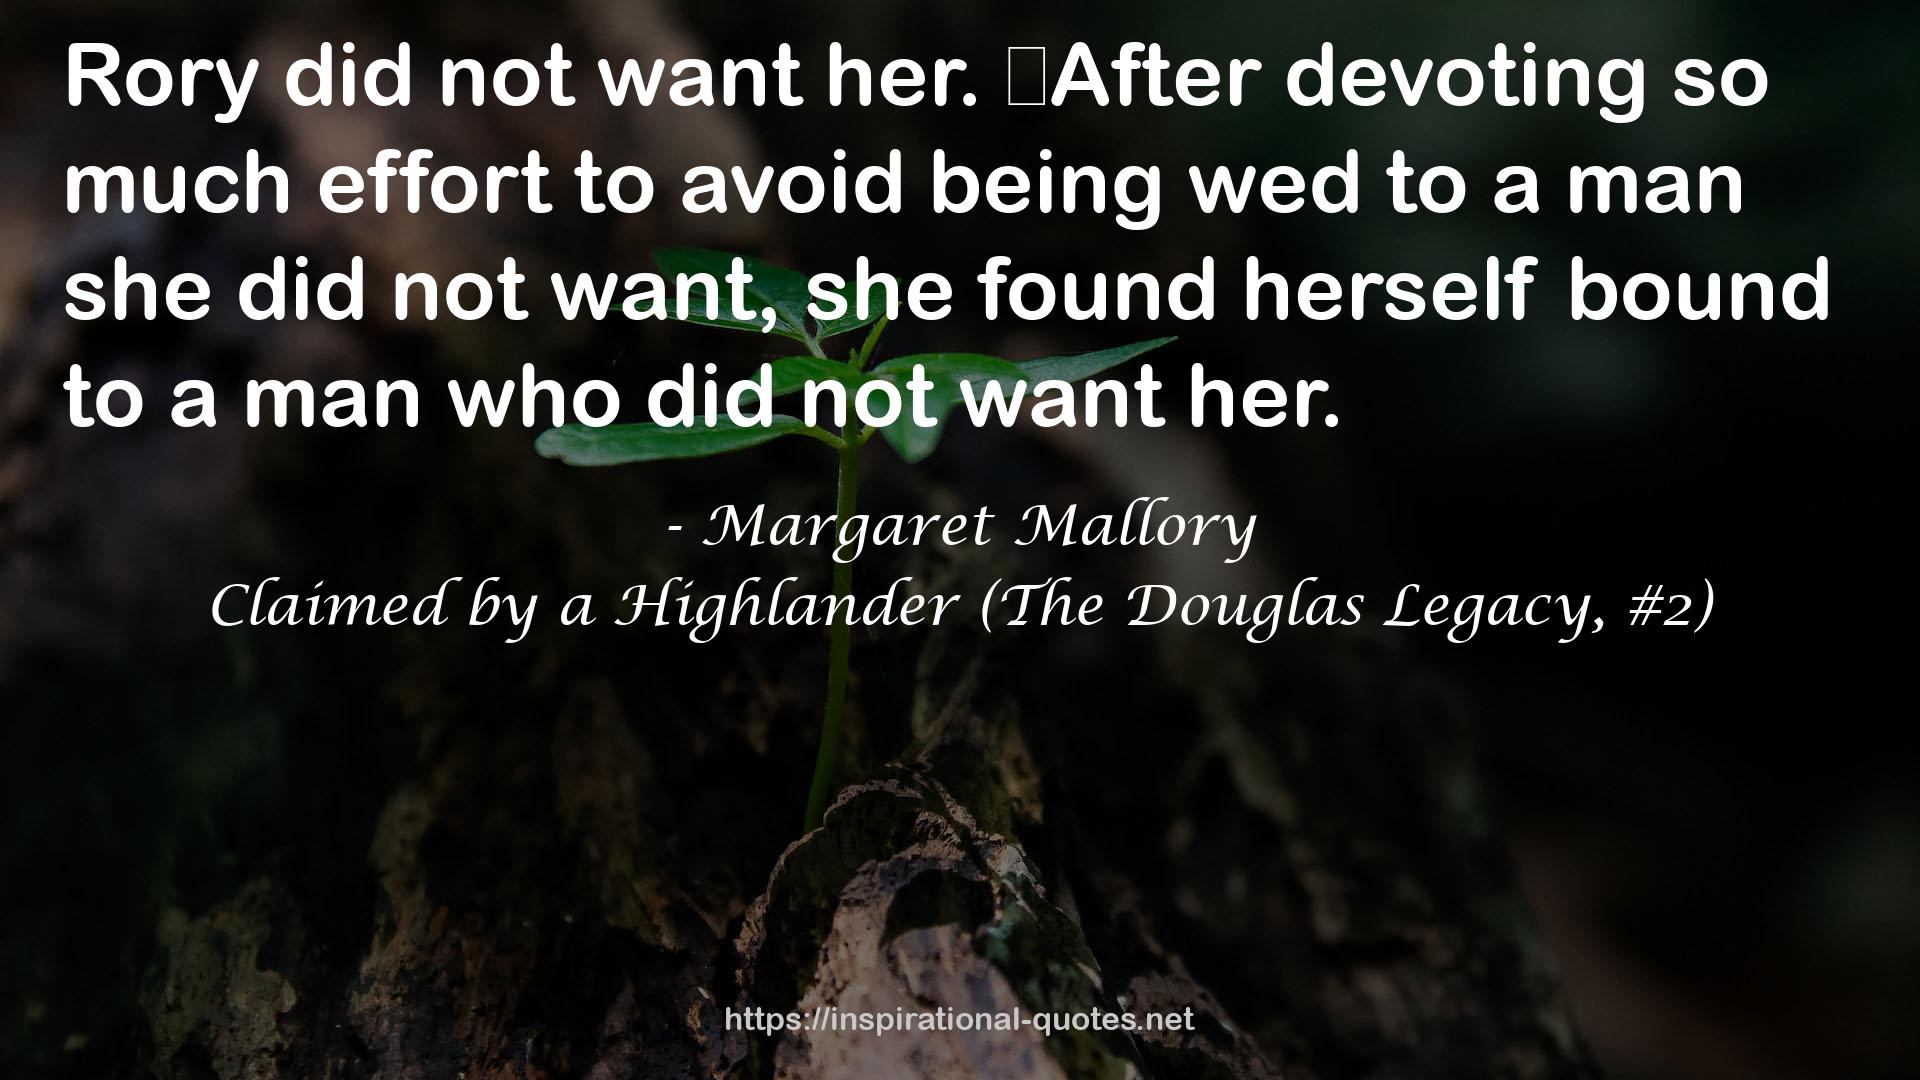 Claimed by a Highlander (The Douglas Legacy, #2) QUOTES